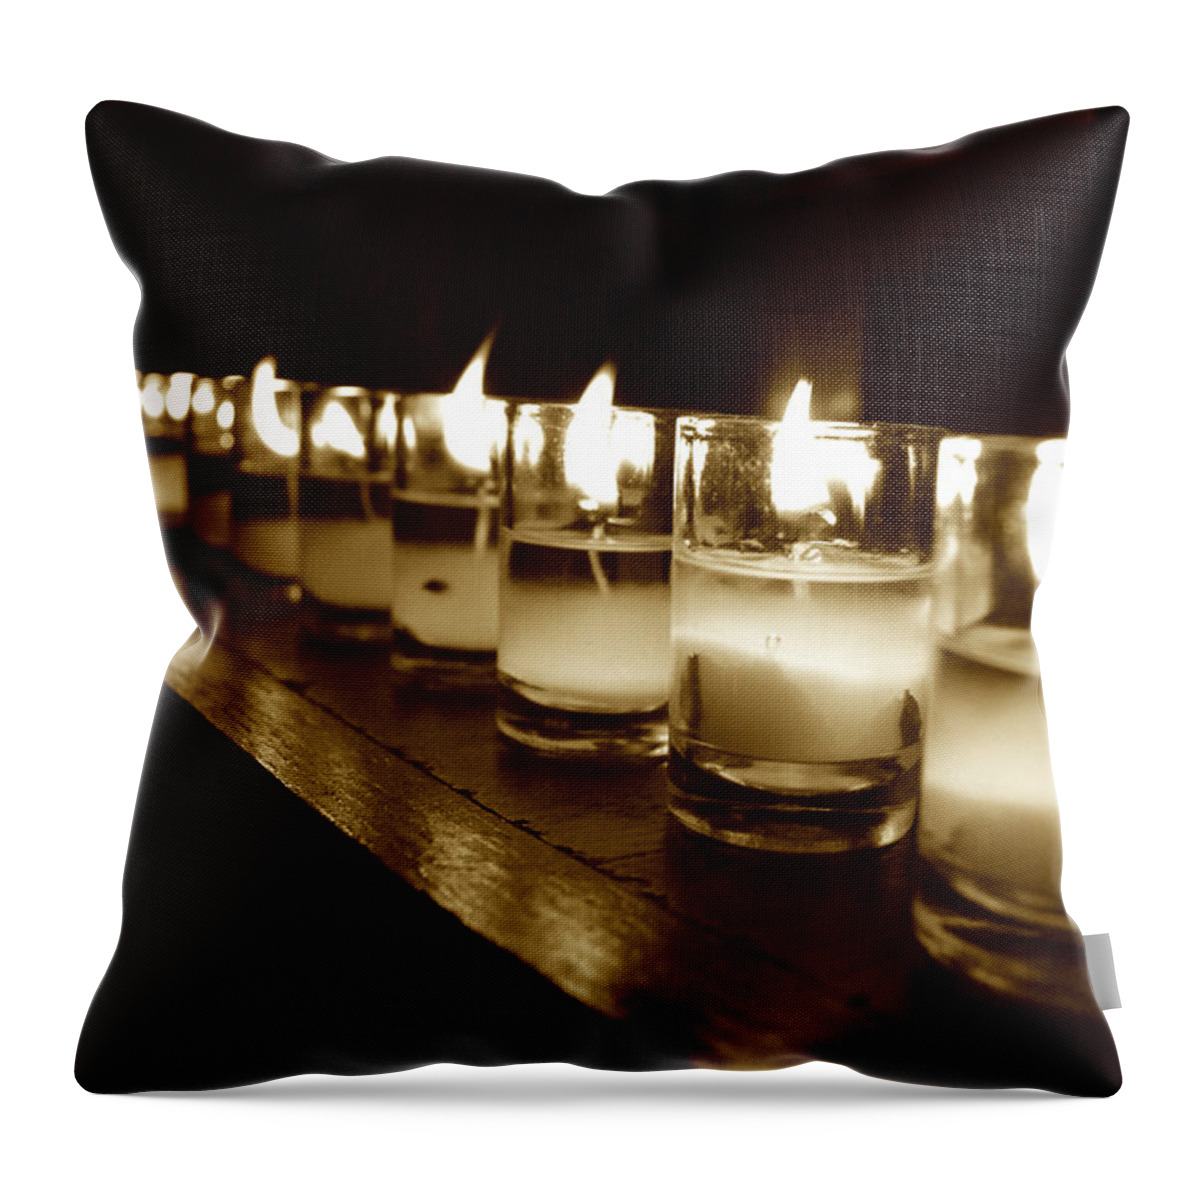 Still Life Throw Pillow featuring the photograph Sepia Candles by Trish Hale